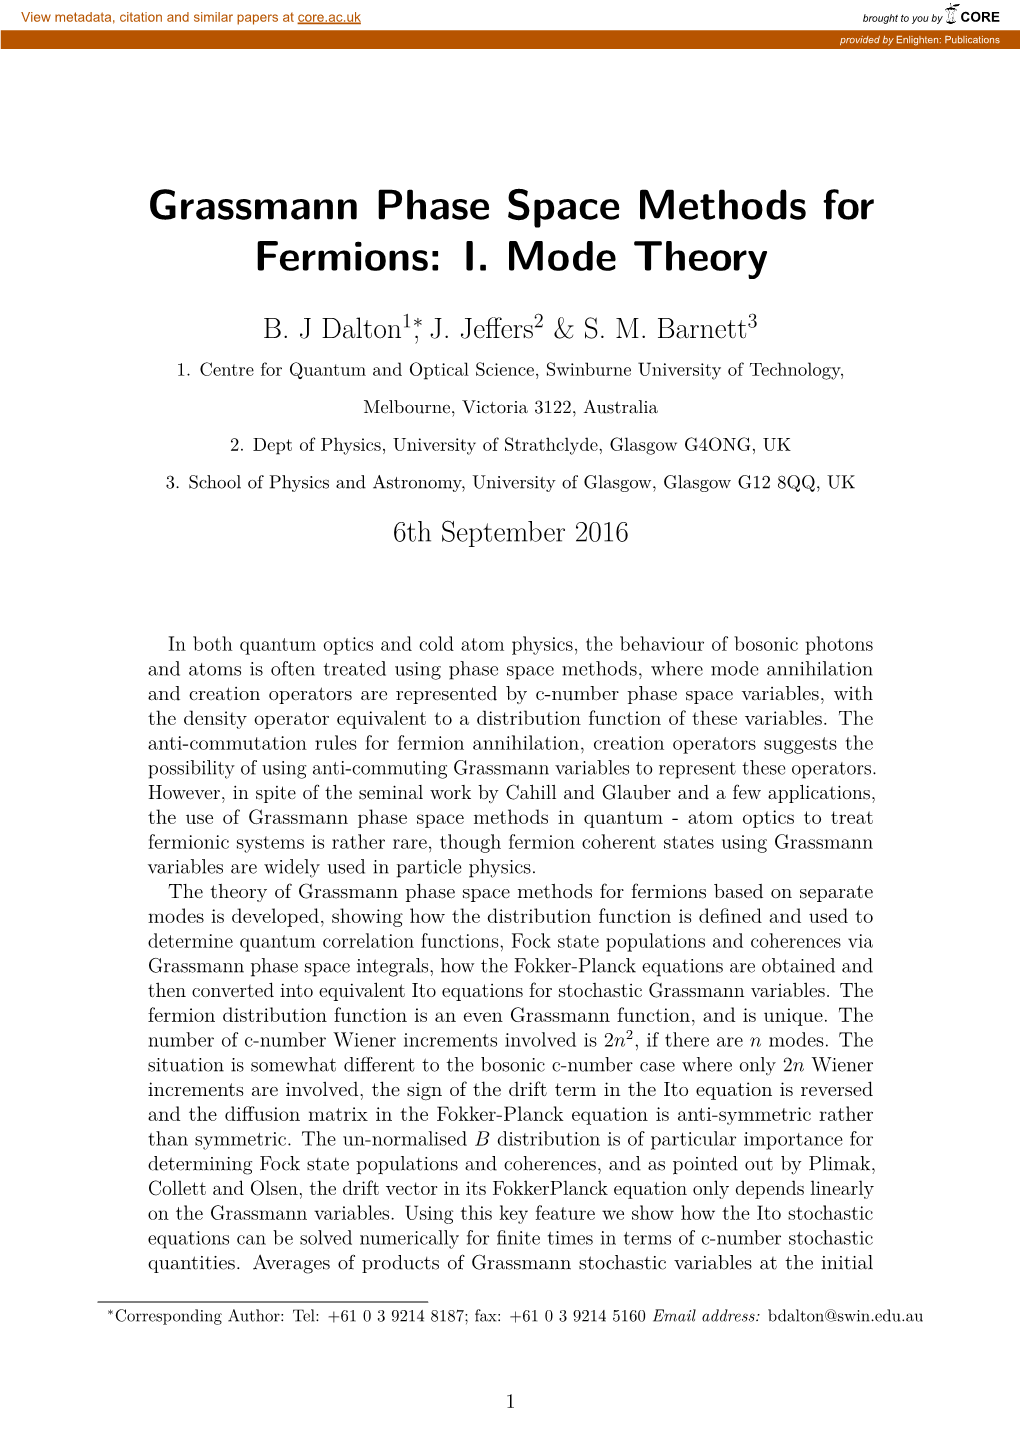 Grassmann Phase Space Methods for Fermions: I